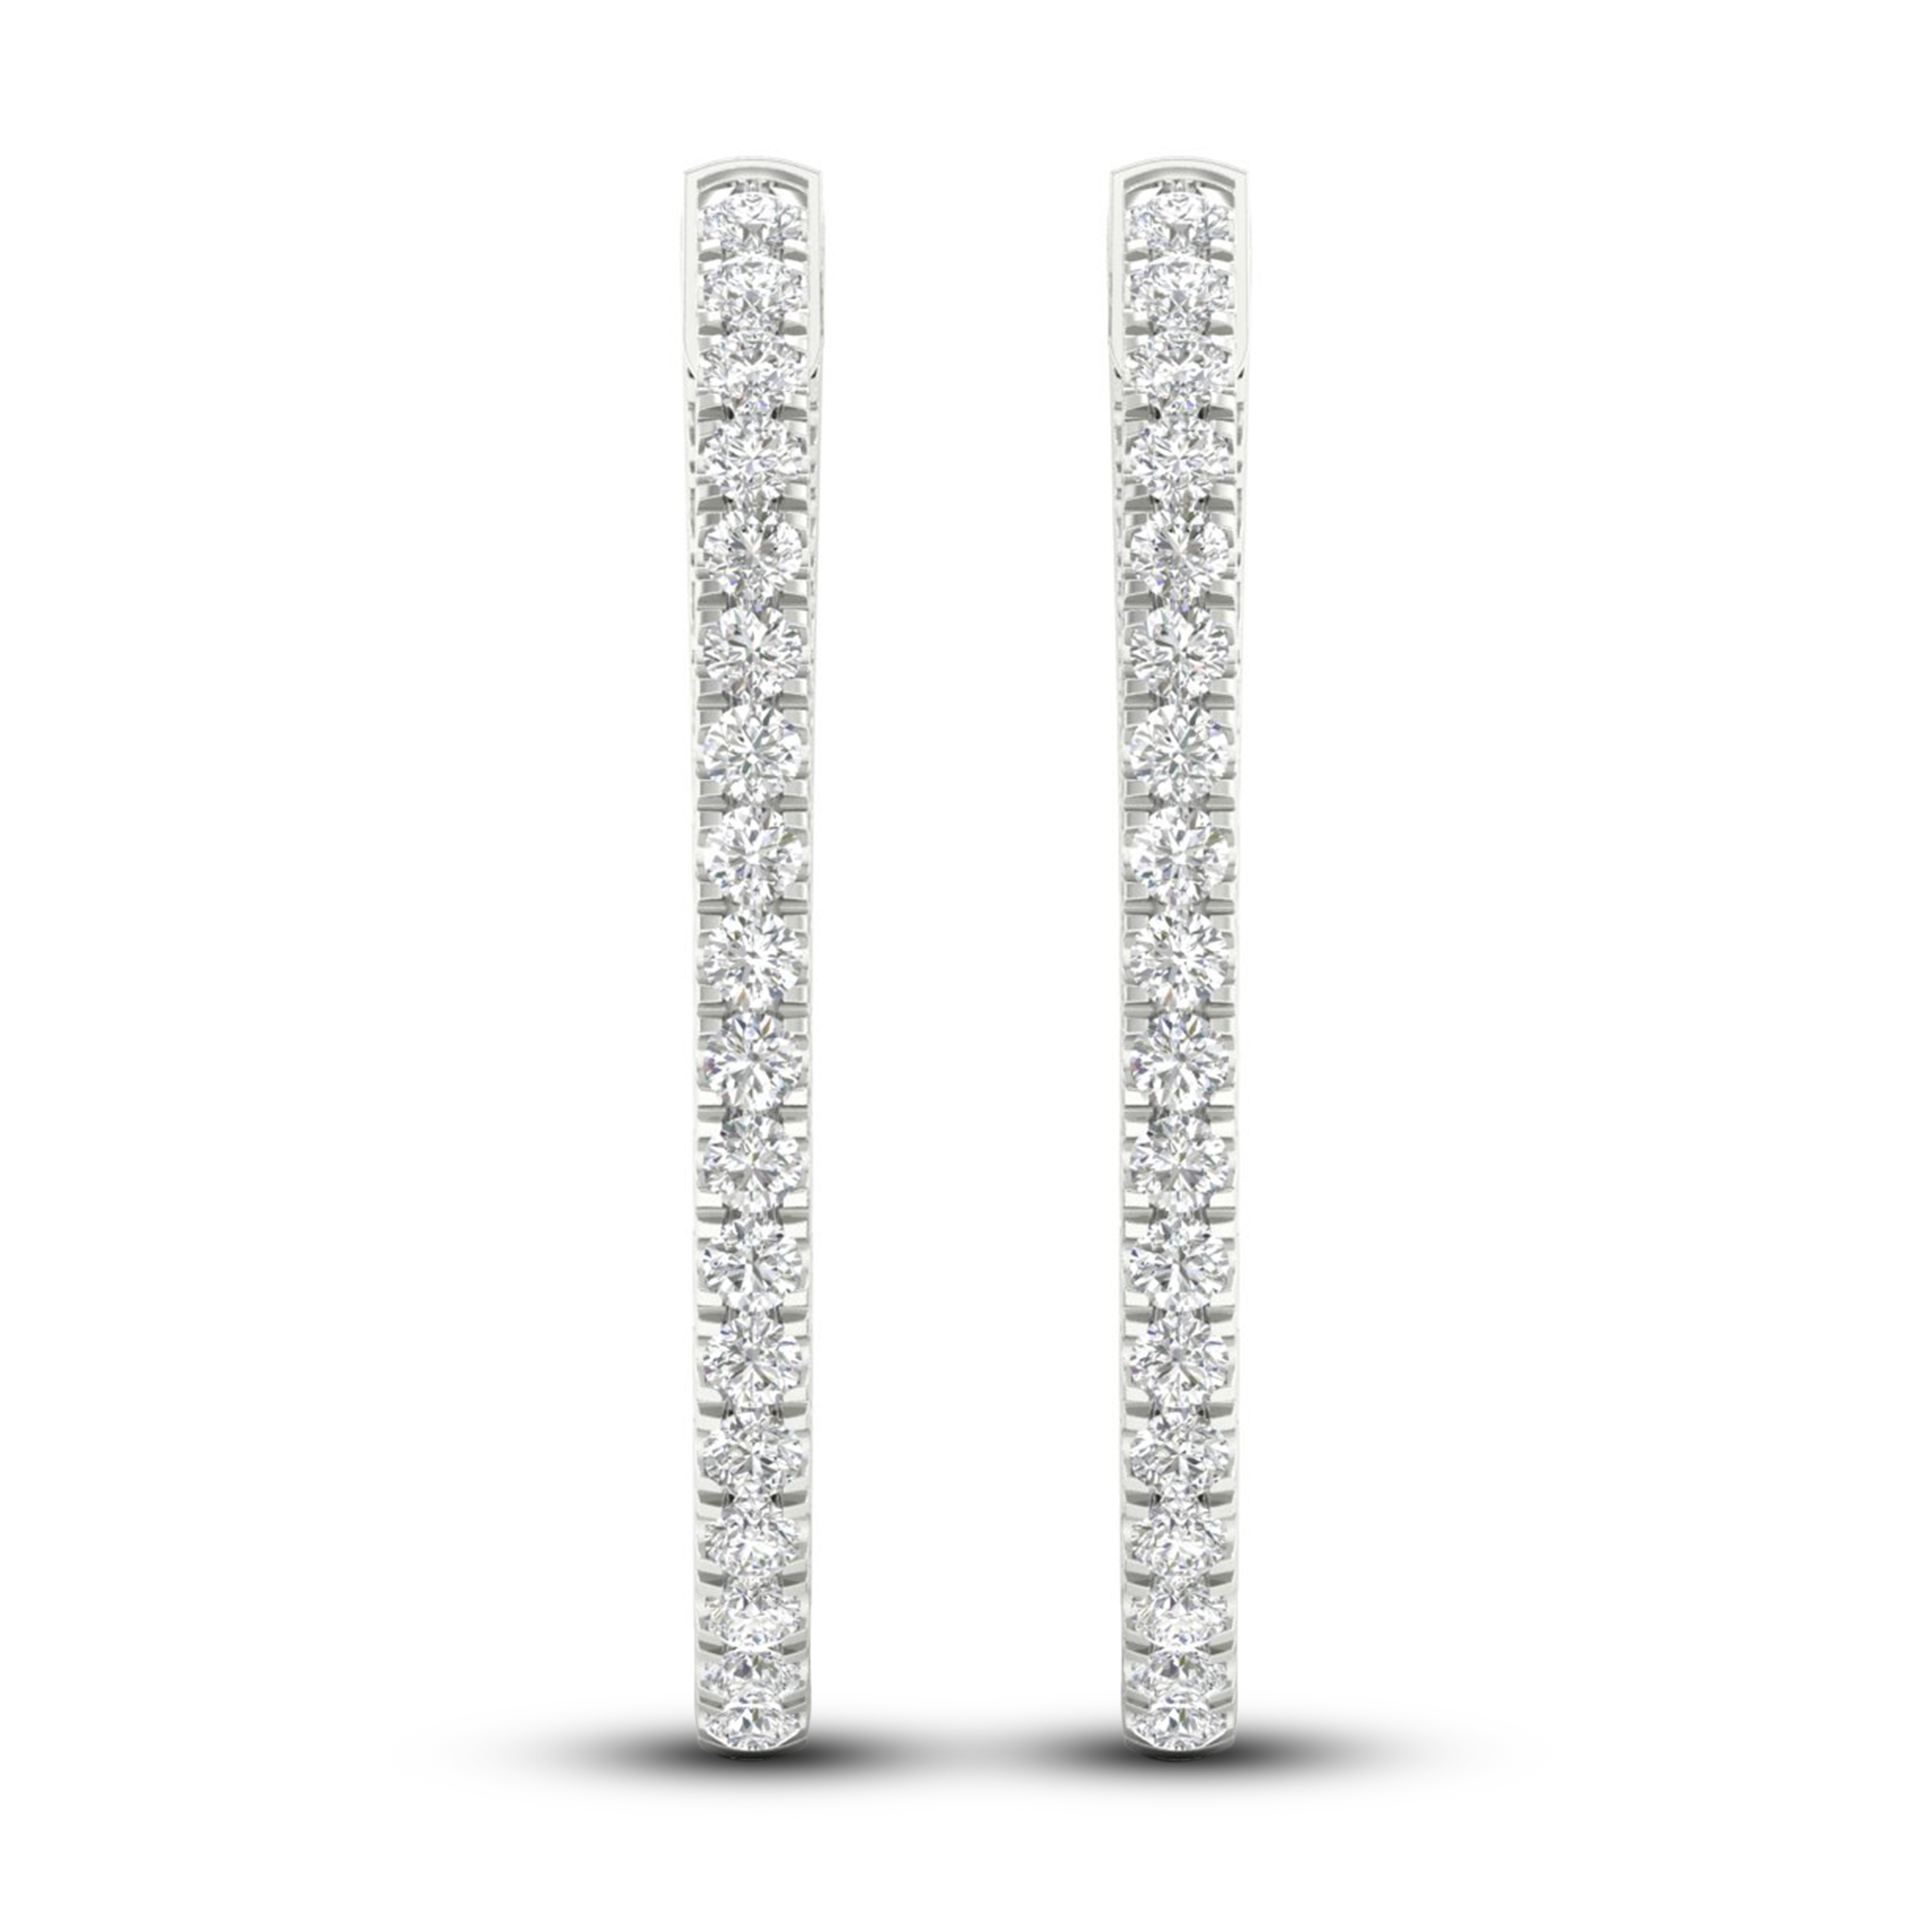 Lab-Created Diamond Earrings 1 ct tw Round 14K White Gold AHPUUUGH